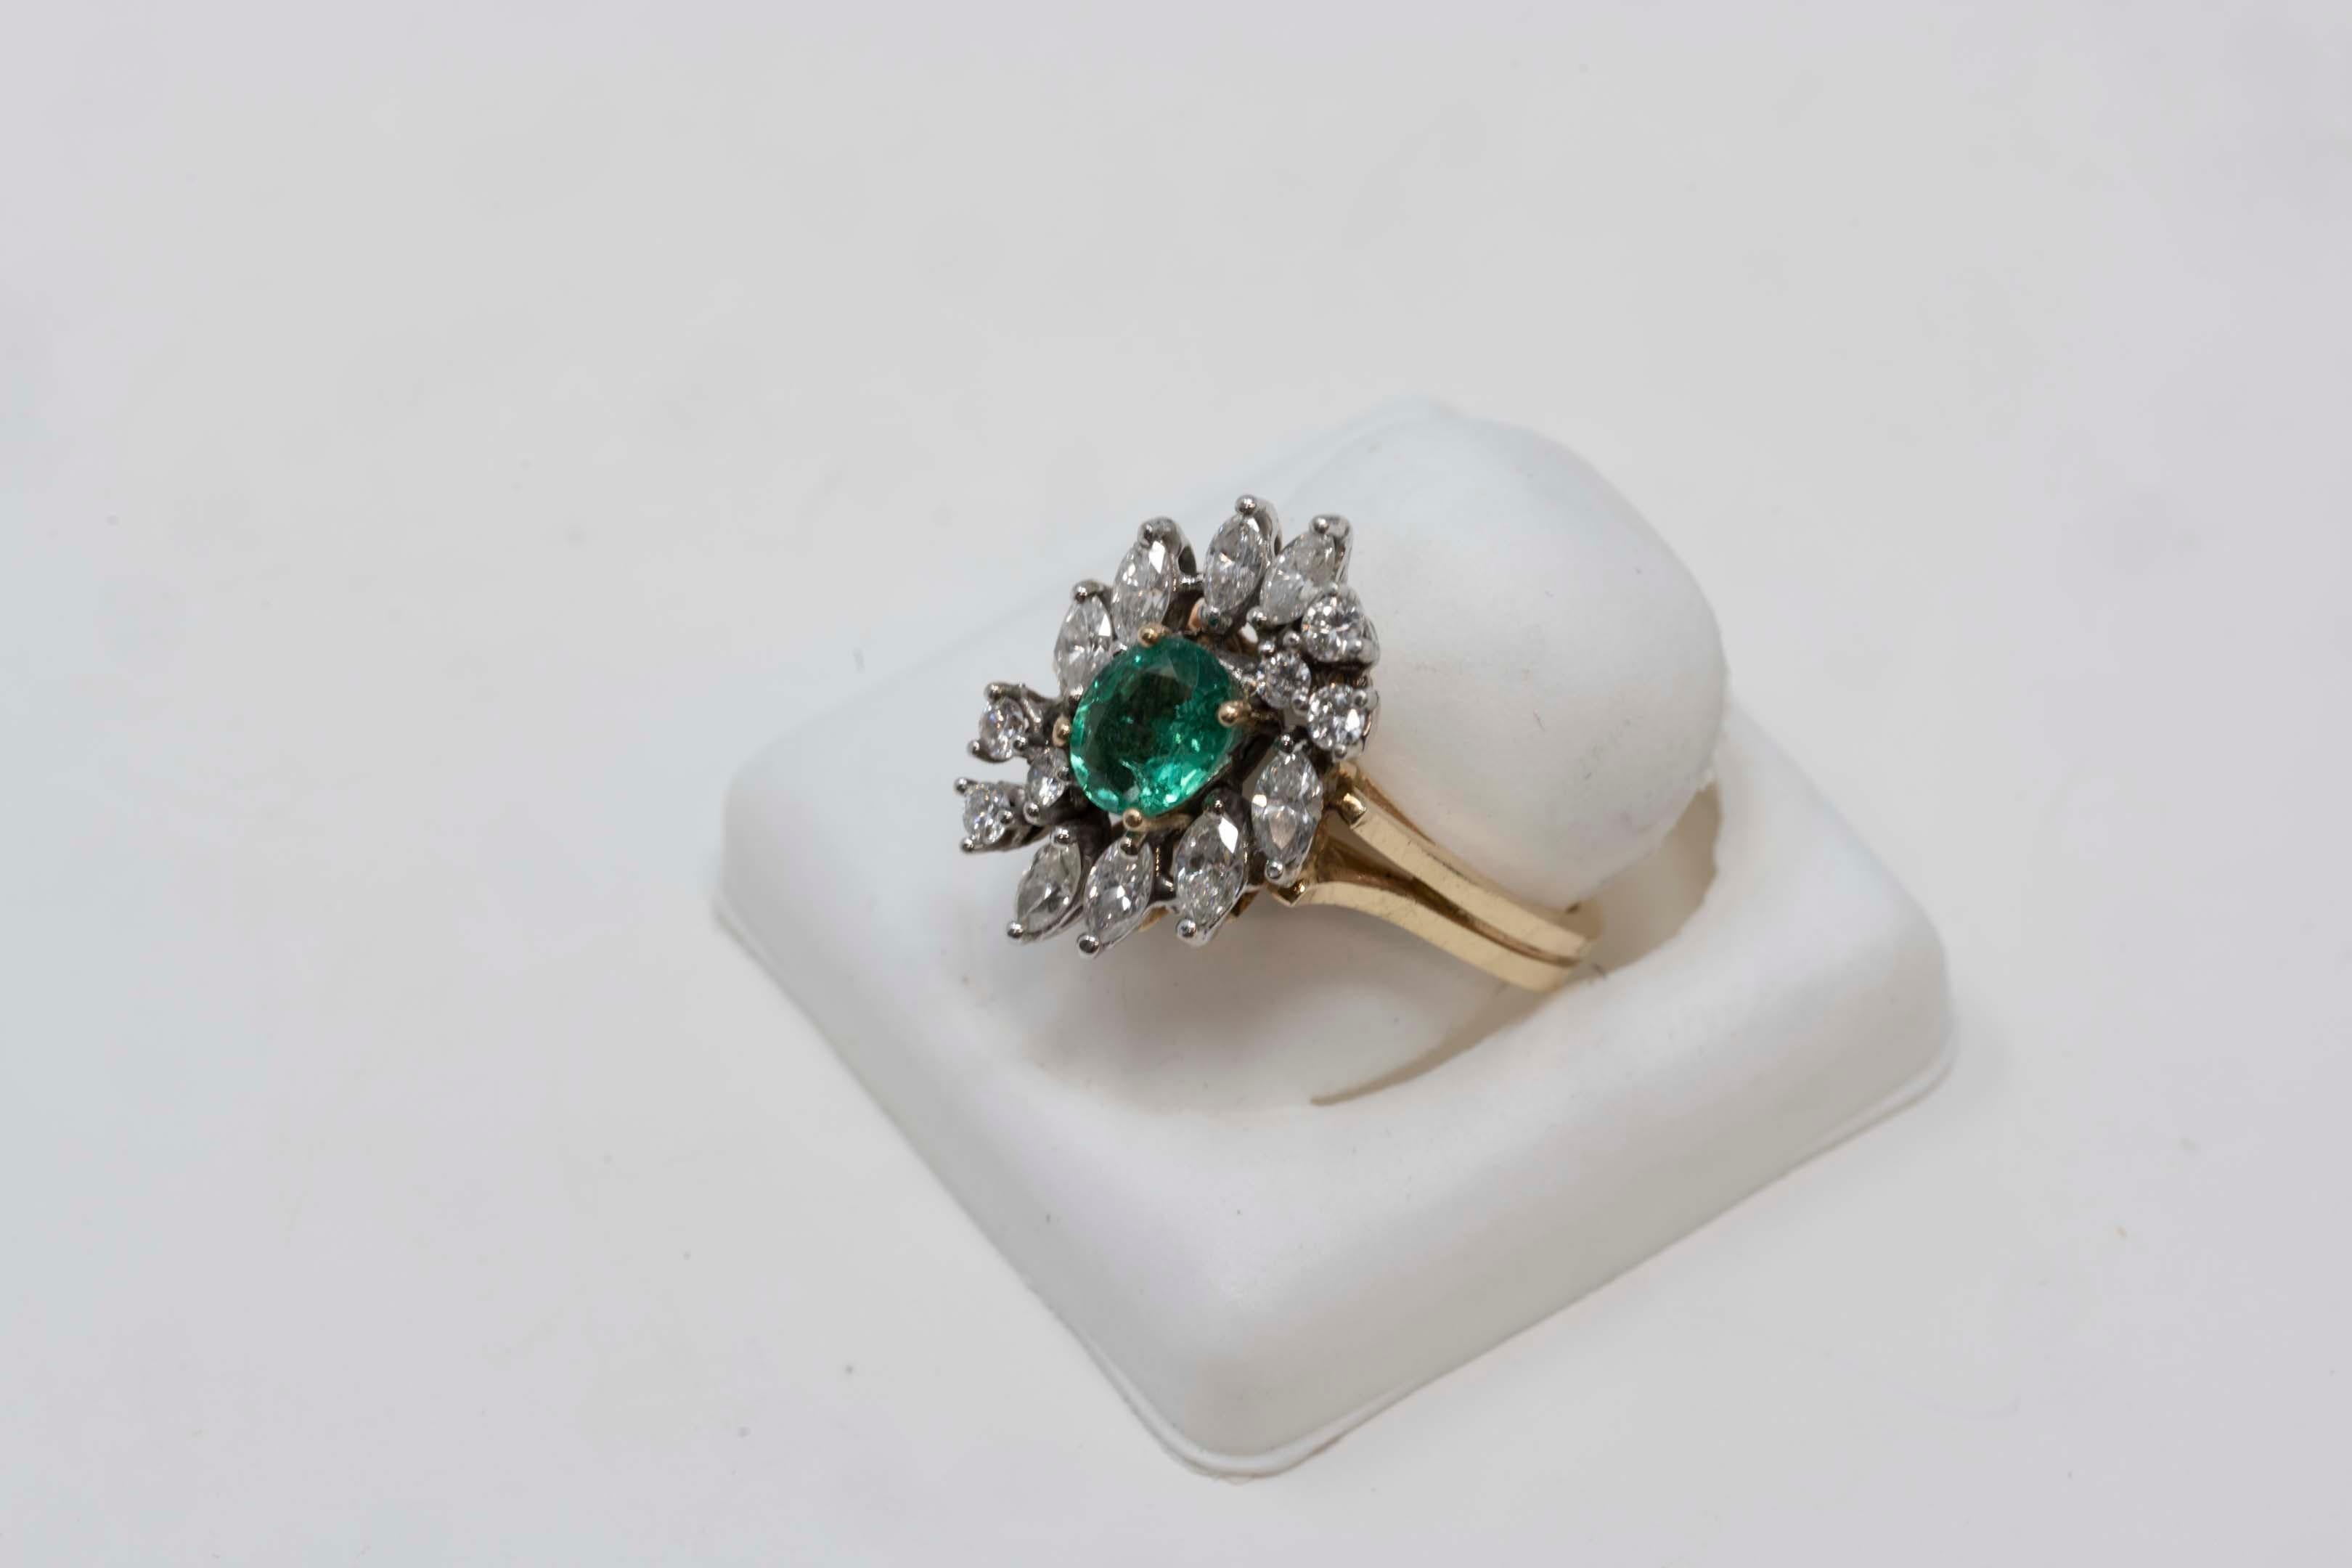 Ladies ring in 14k yellow and white gold (stamped, modern style, bright finish. No maker mark. Total weight of ring: 5.8 grams. The ring is set with 1 oval-shaped, mixed cut natural emerald. Weighs 0.65 ct, measures 6.87 x 5.66 x 3.03 mm. Hue: